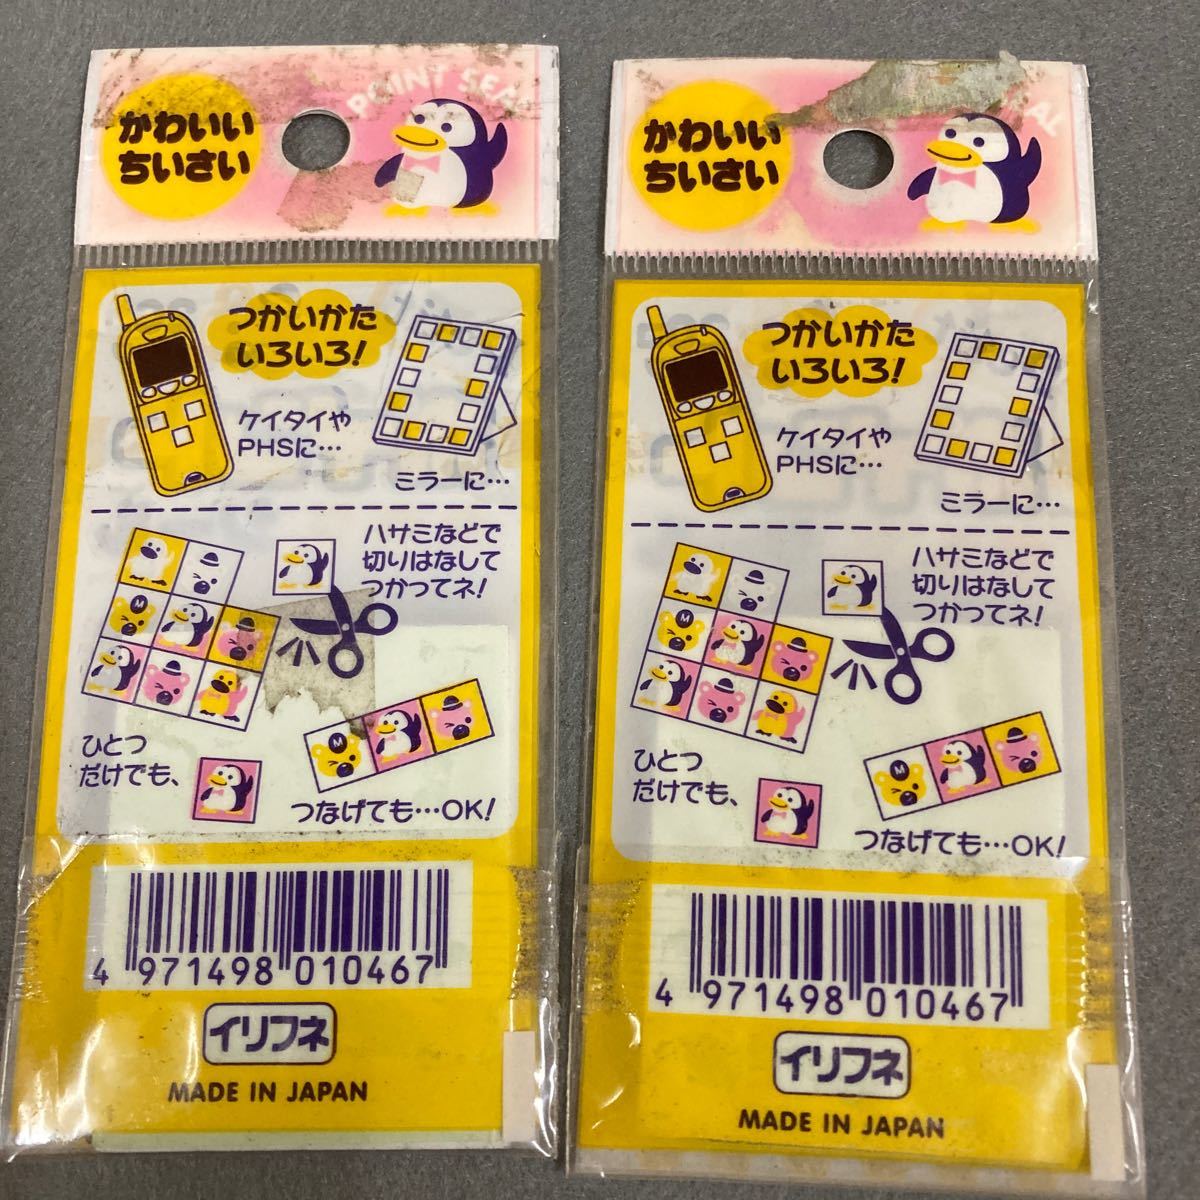  Heisei era .... seal Point seal 2 pack 1990 period that time thing unopened retro pop fancy 